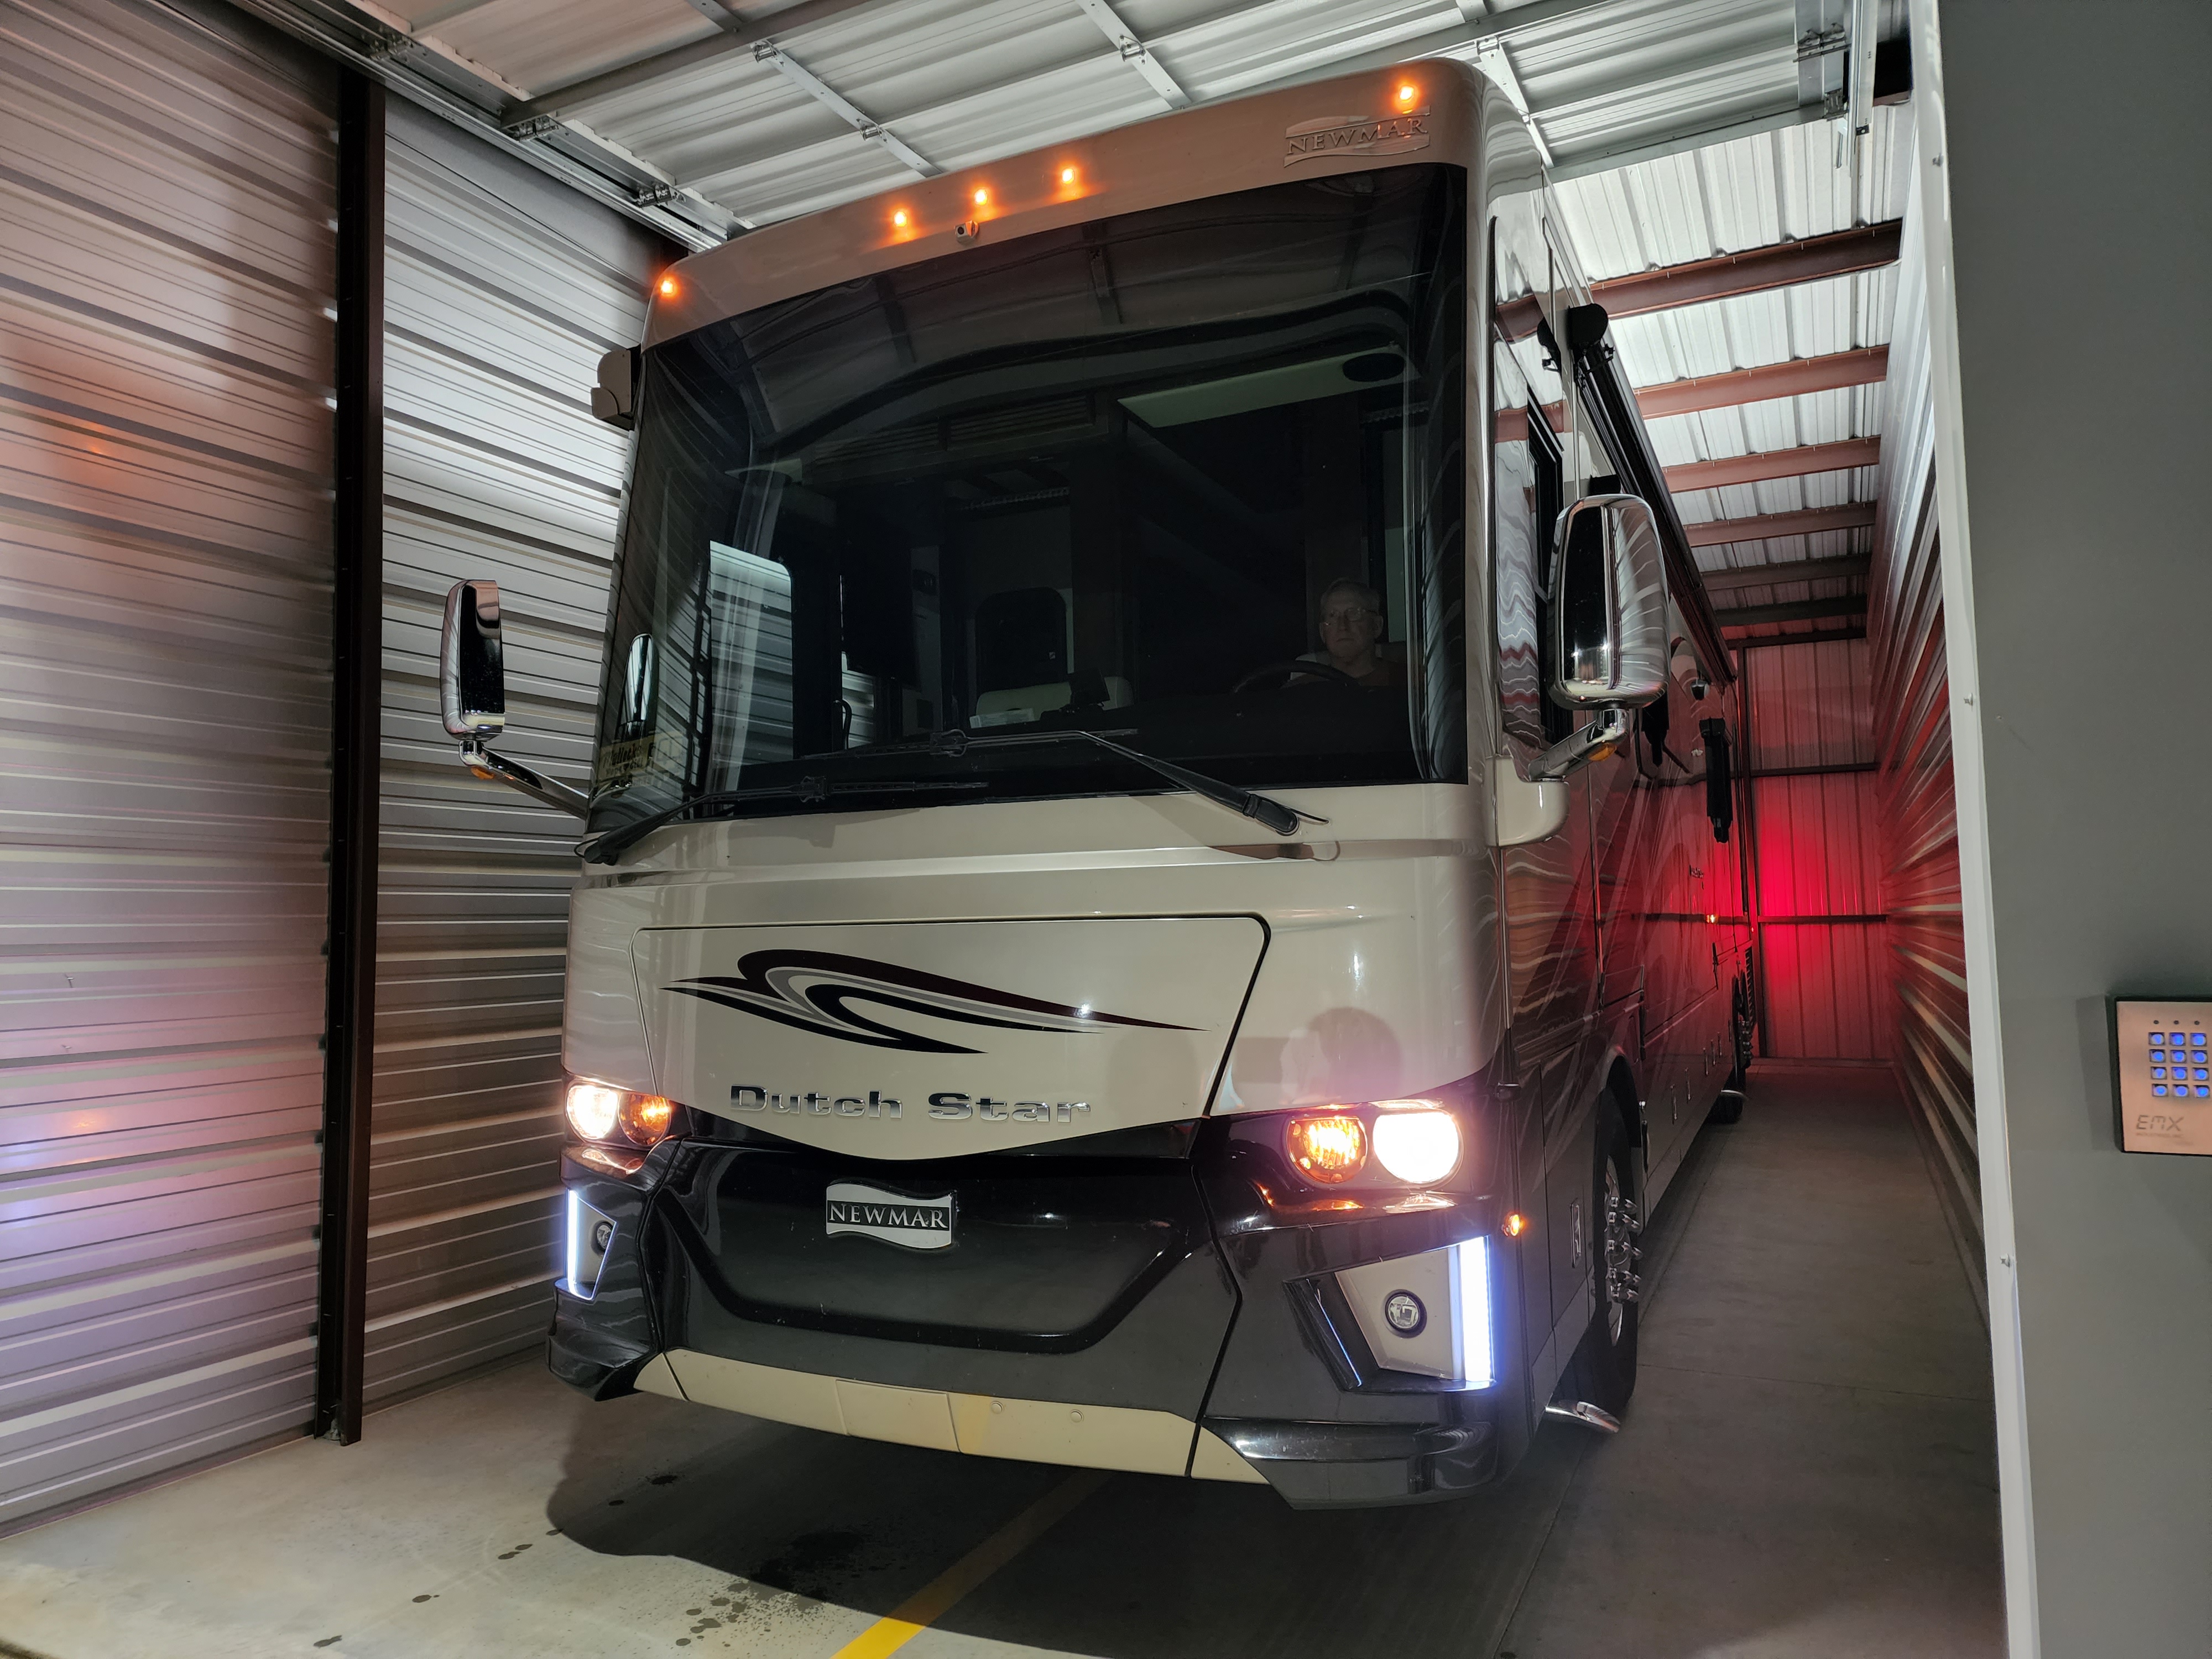 Enclosed RV, Boat, and Vehicle Storage in Jackson, TN